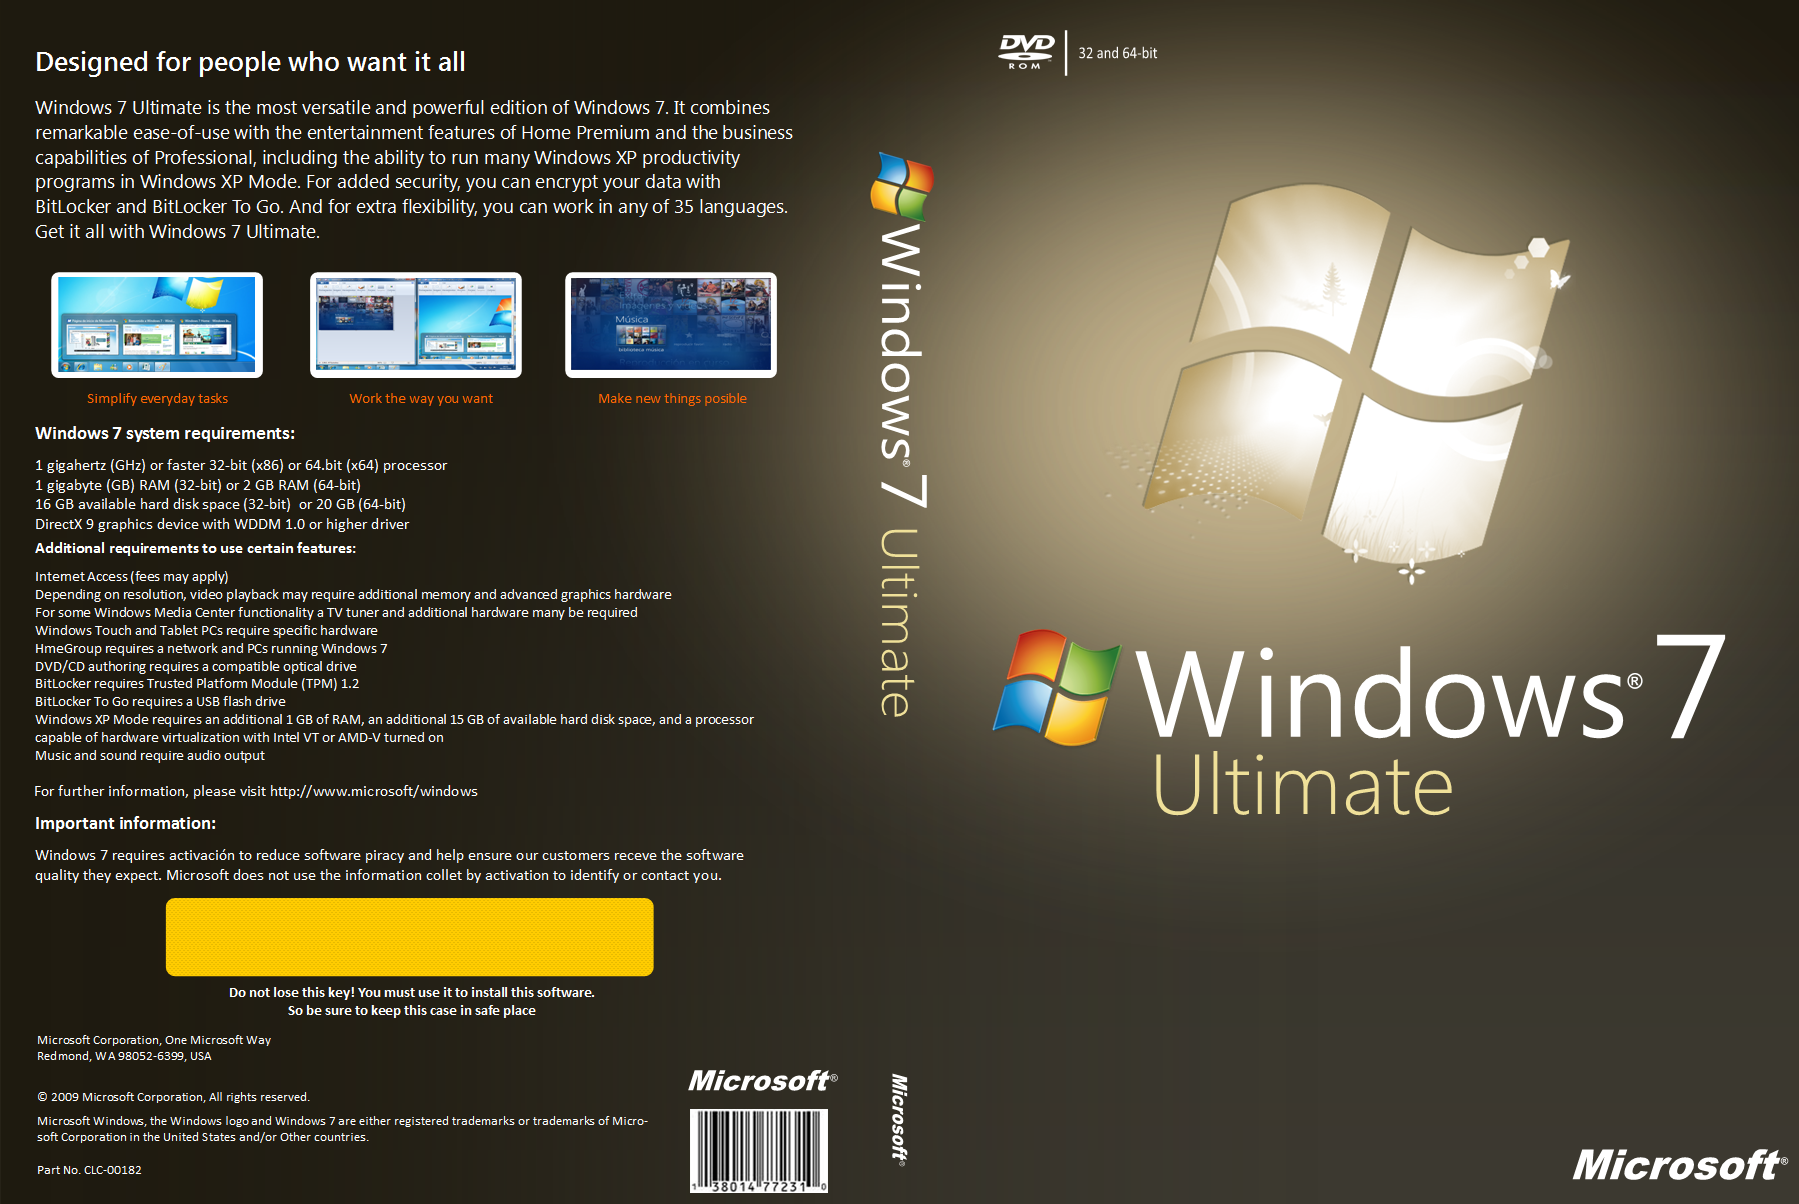 windows 7 ultimate x32 iso download